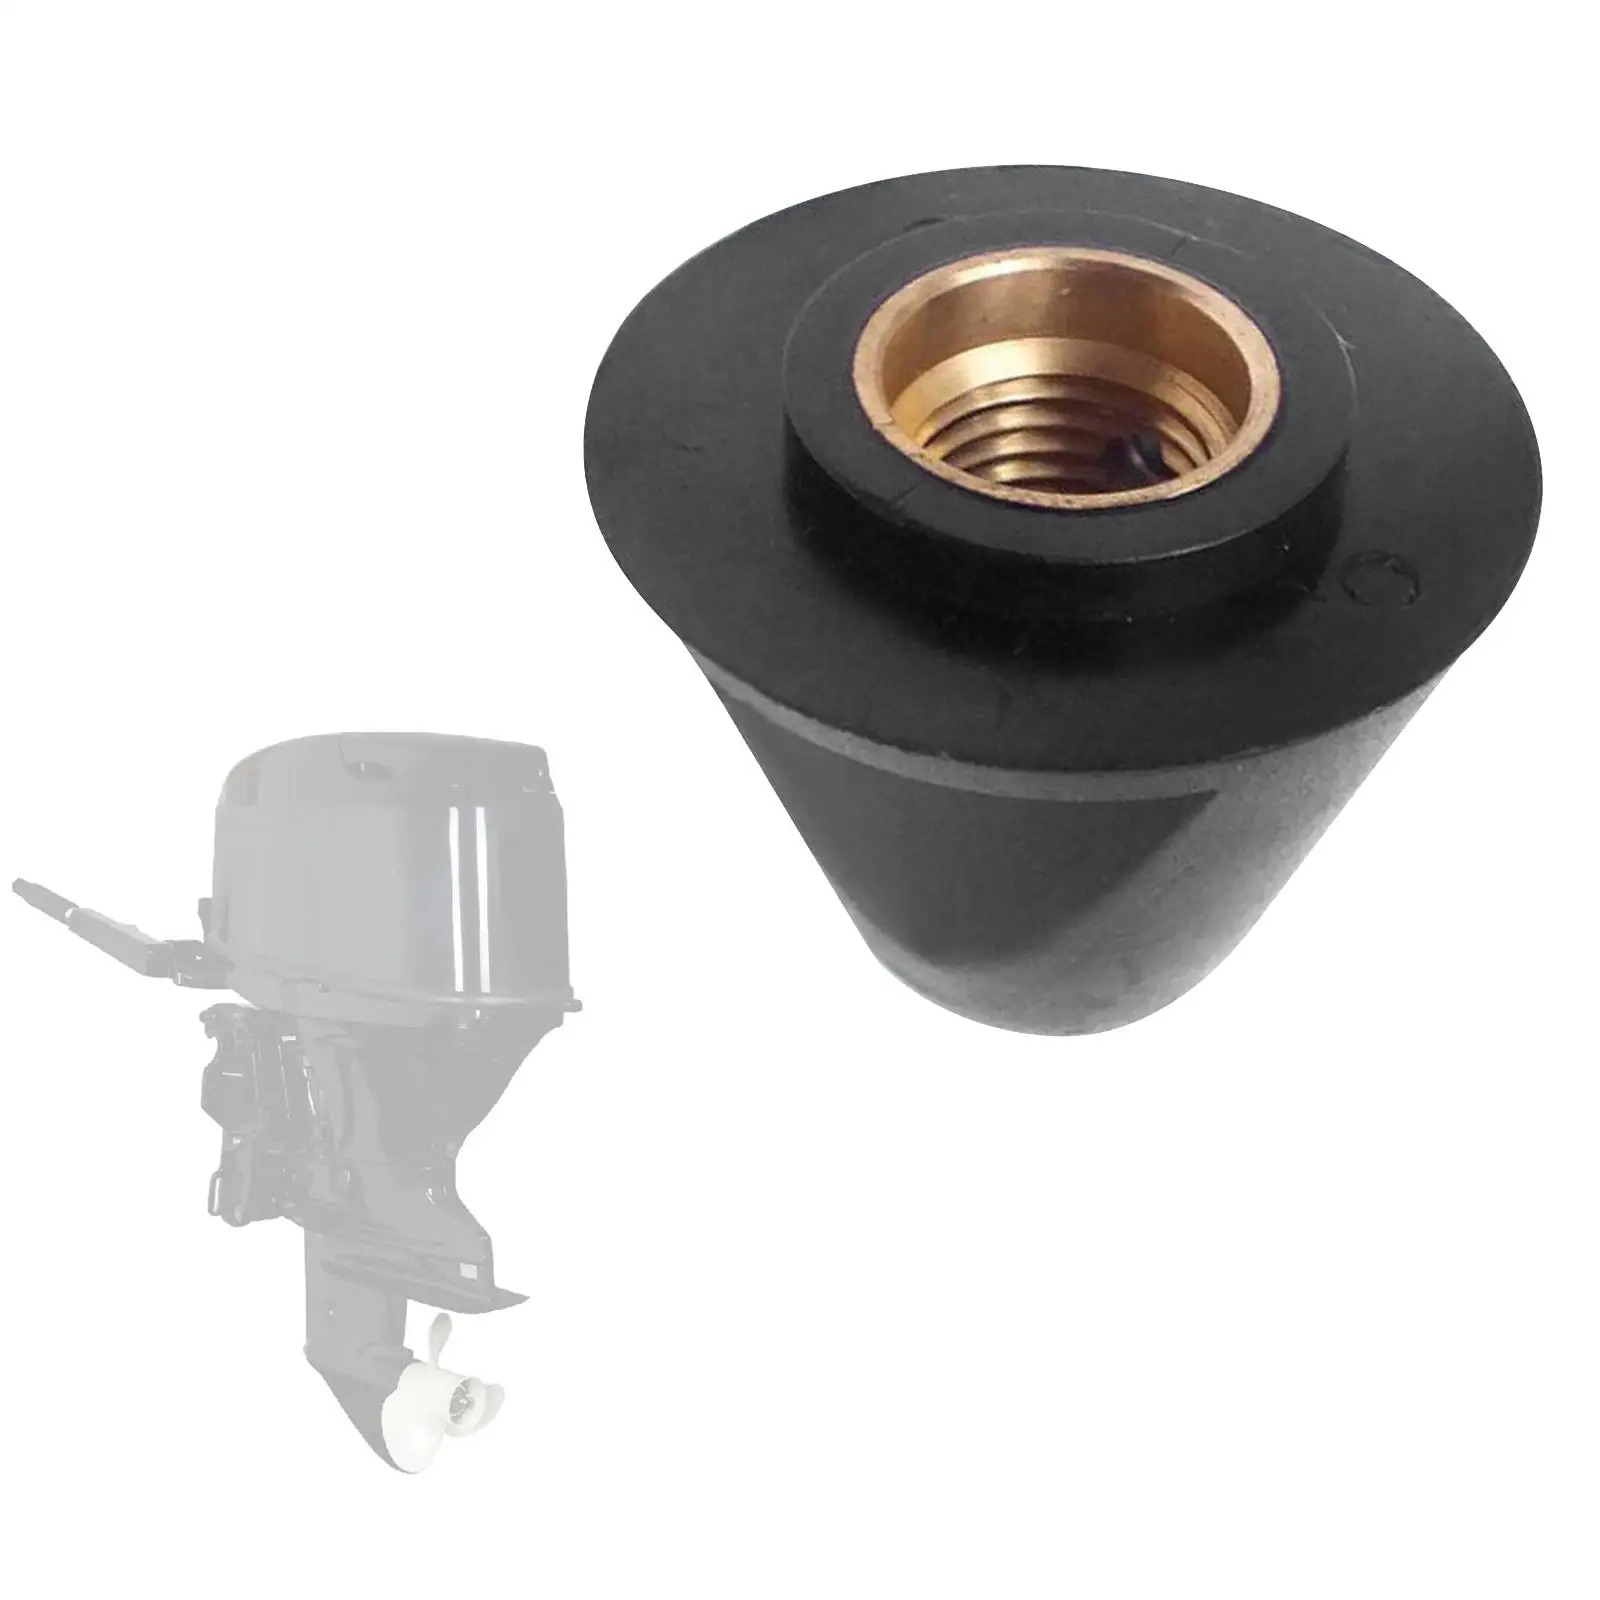 Propeller Prop Nut 647-45616-02-00 for Yamaha Outboard 4HP 5HP 2